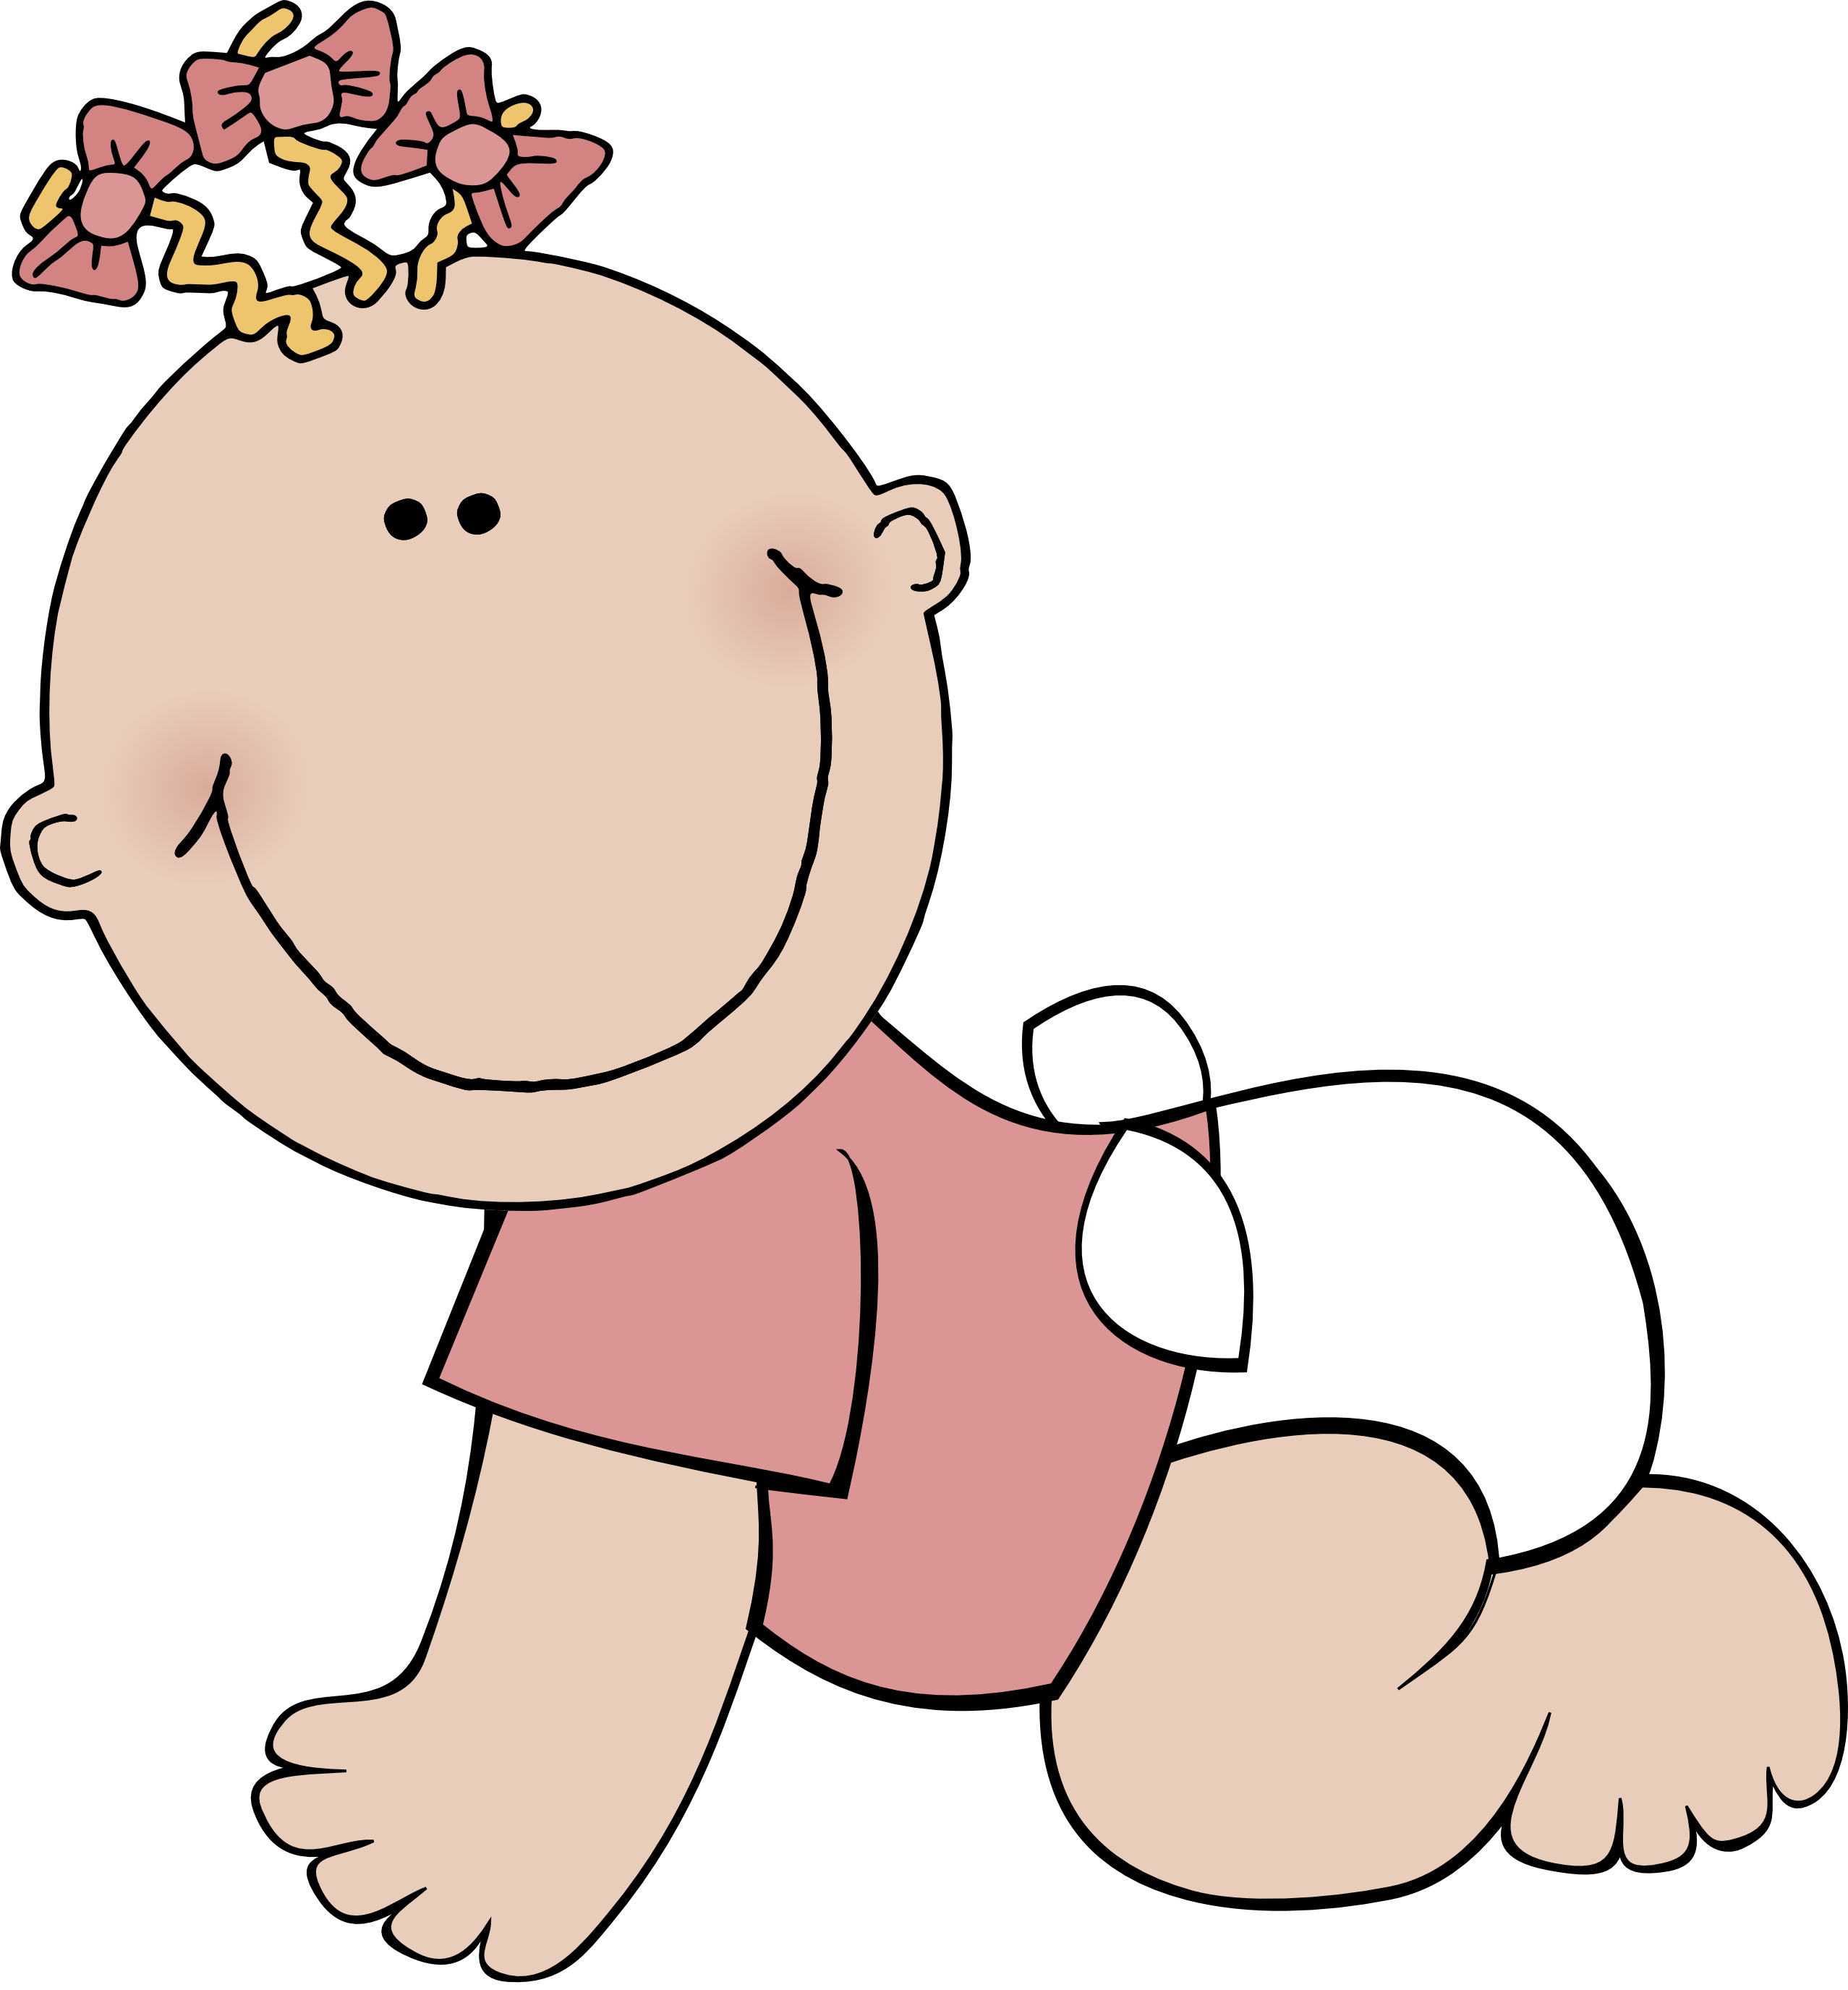 New Baby Clip Art - clipartal - Baby Clipart